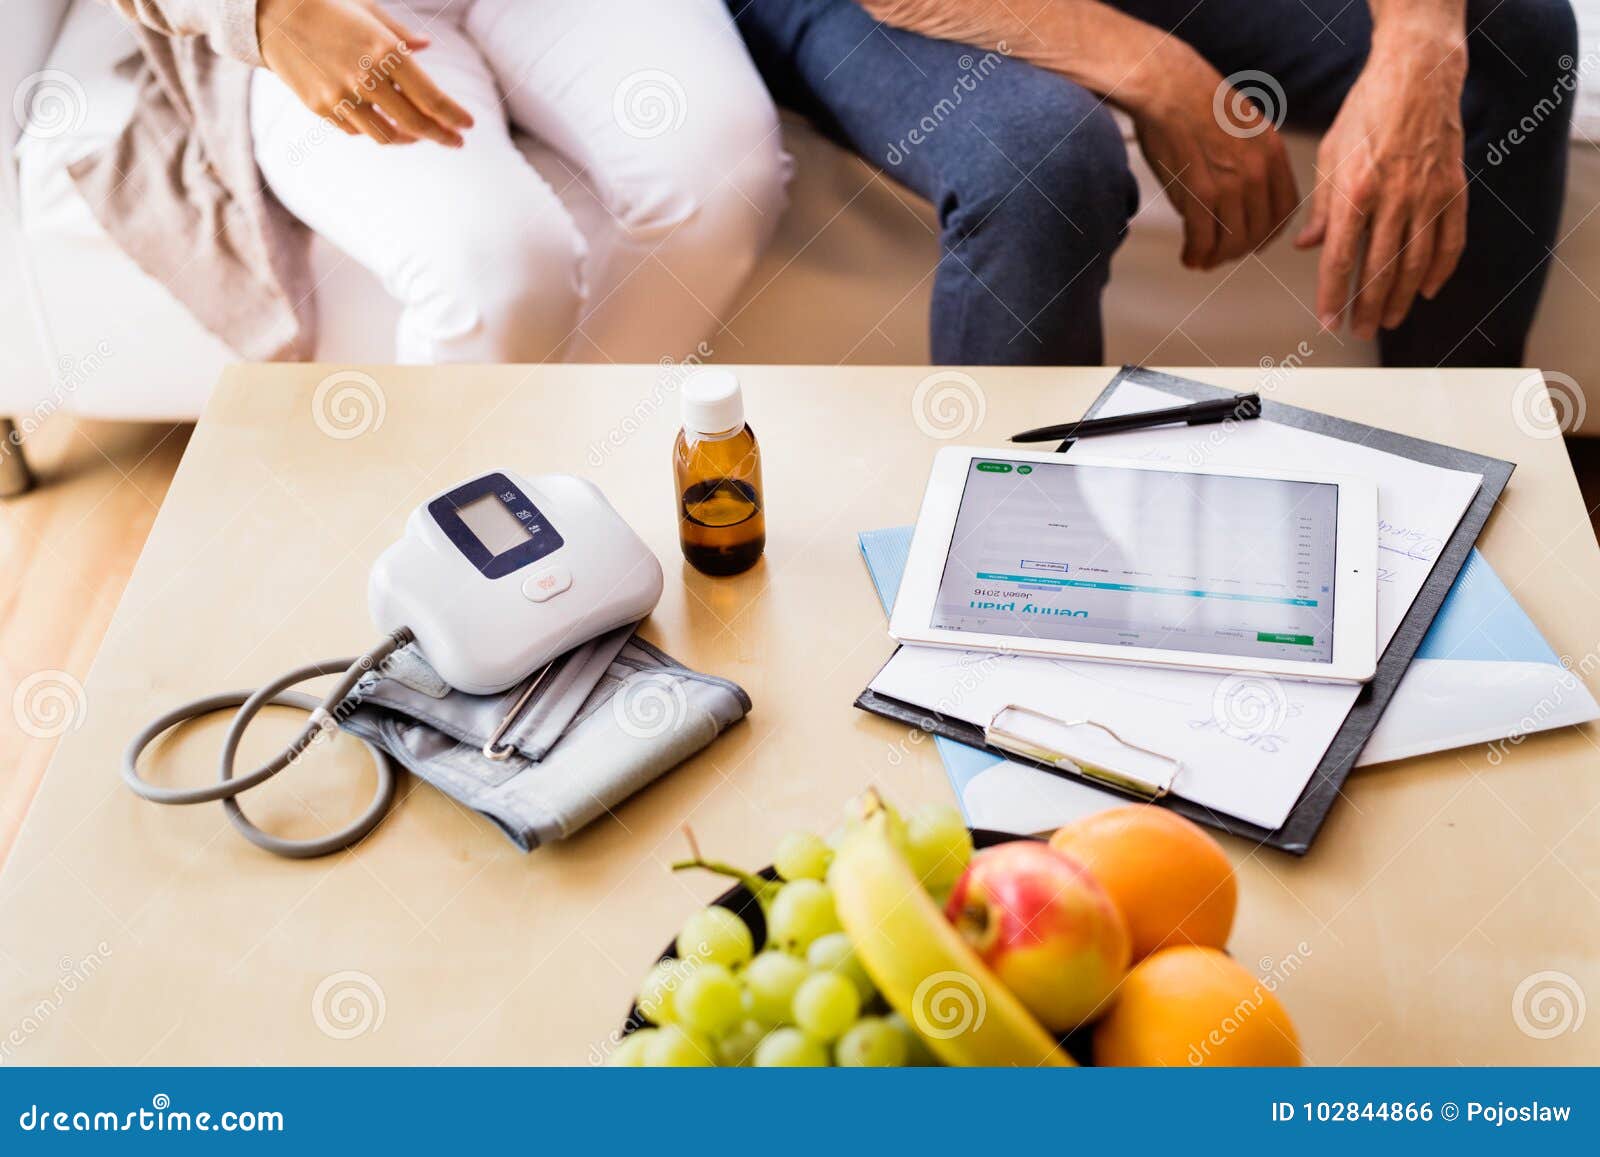 health visitor and a senior man with tablet during home visit.